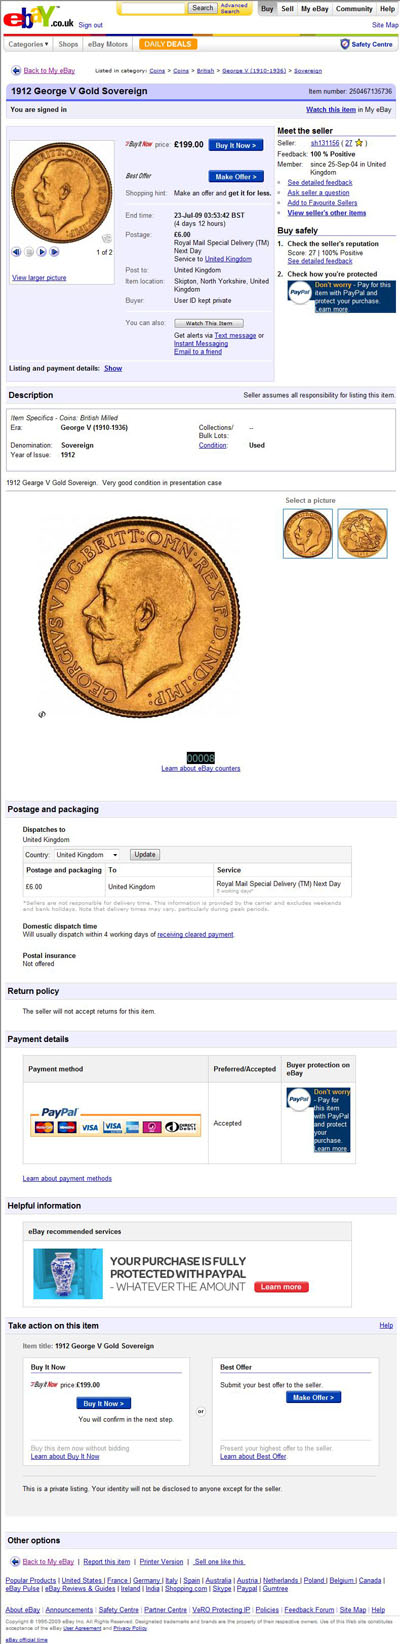 sh131156 eBay Listing Using 2 of our 1912 George V Gold Sovereign Images